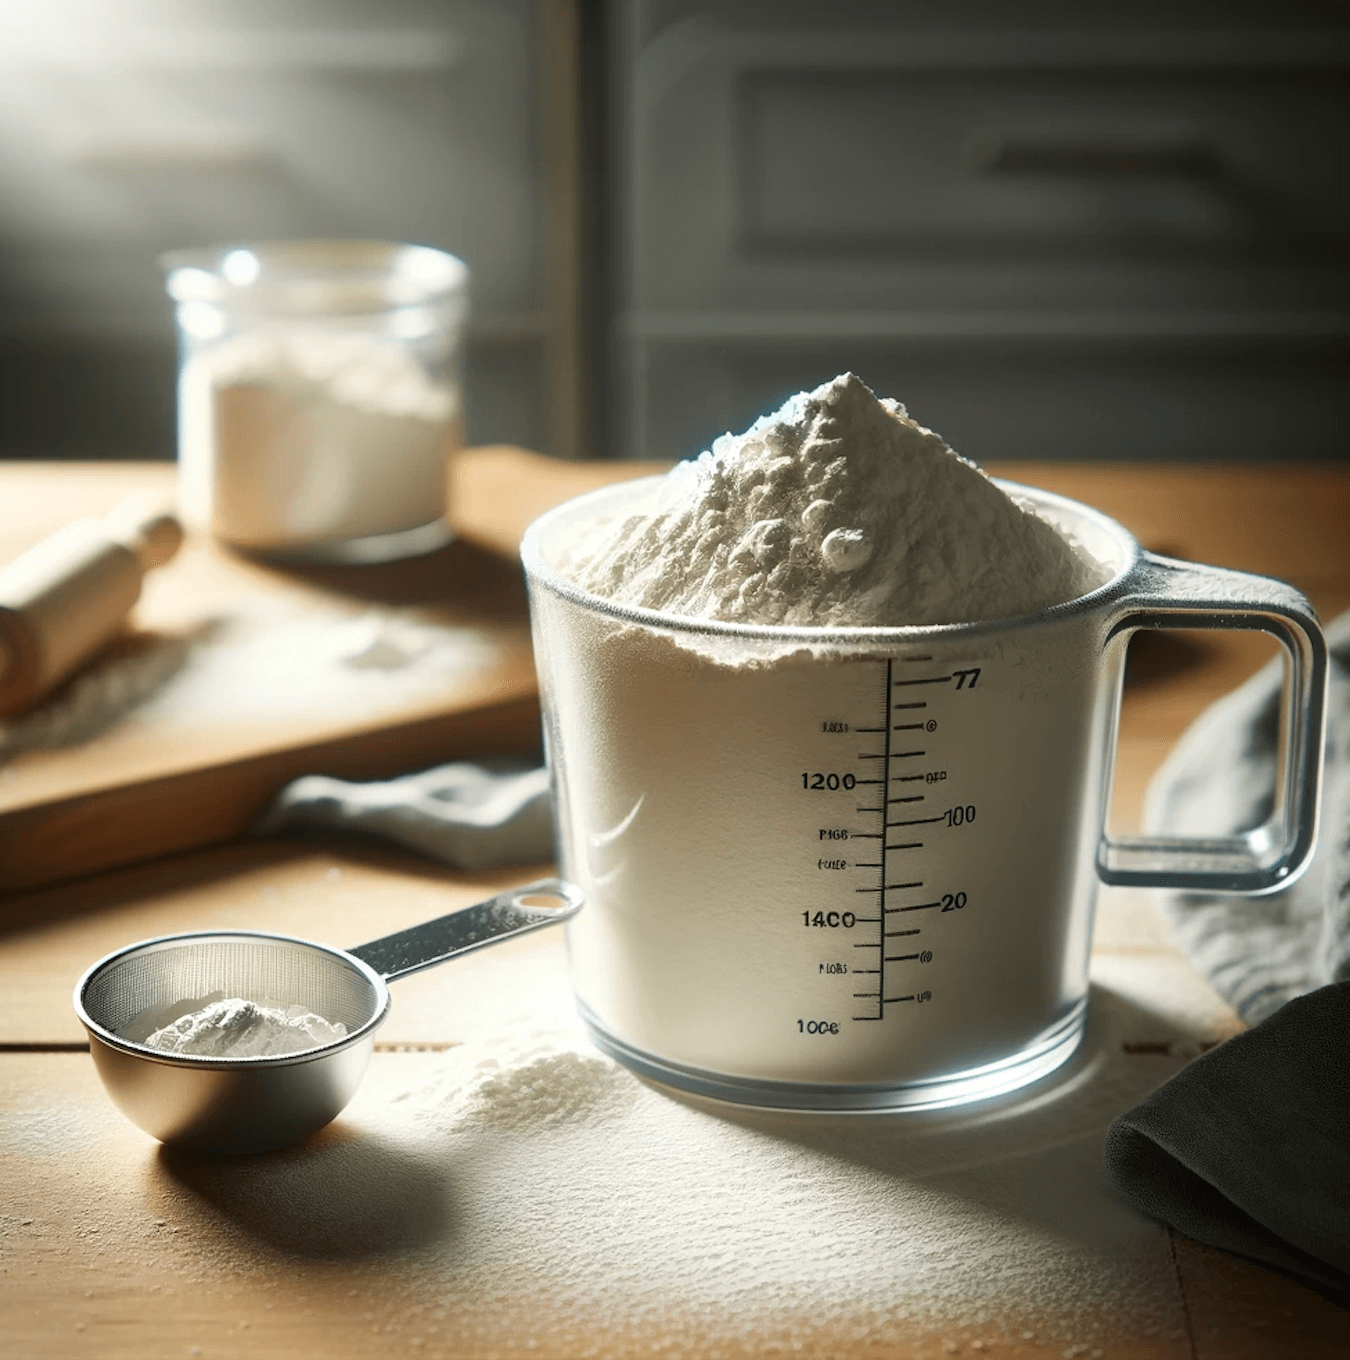 50 grams of flour in cups